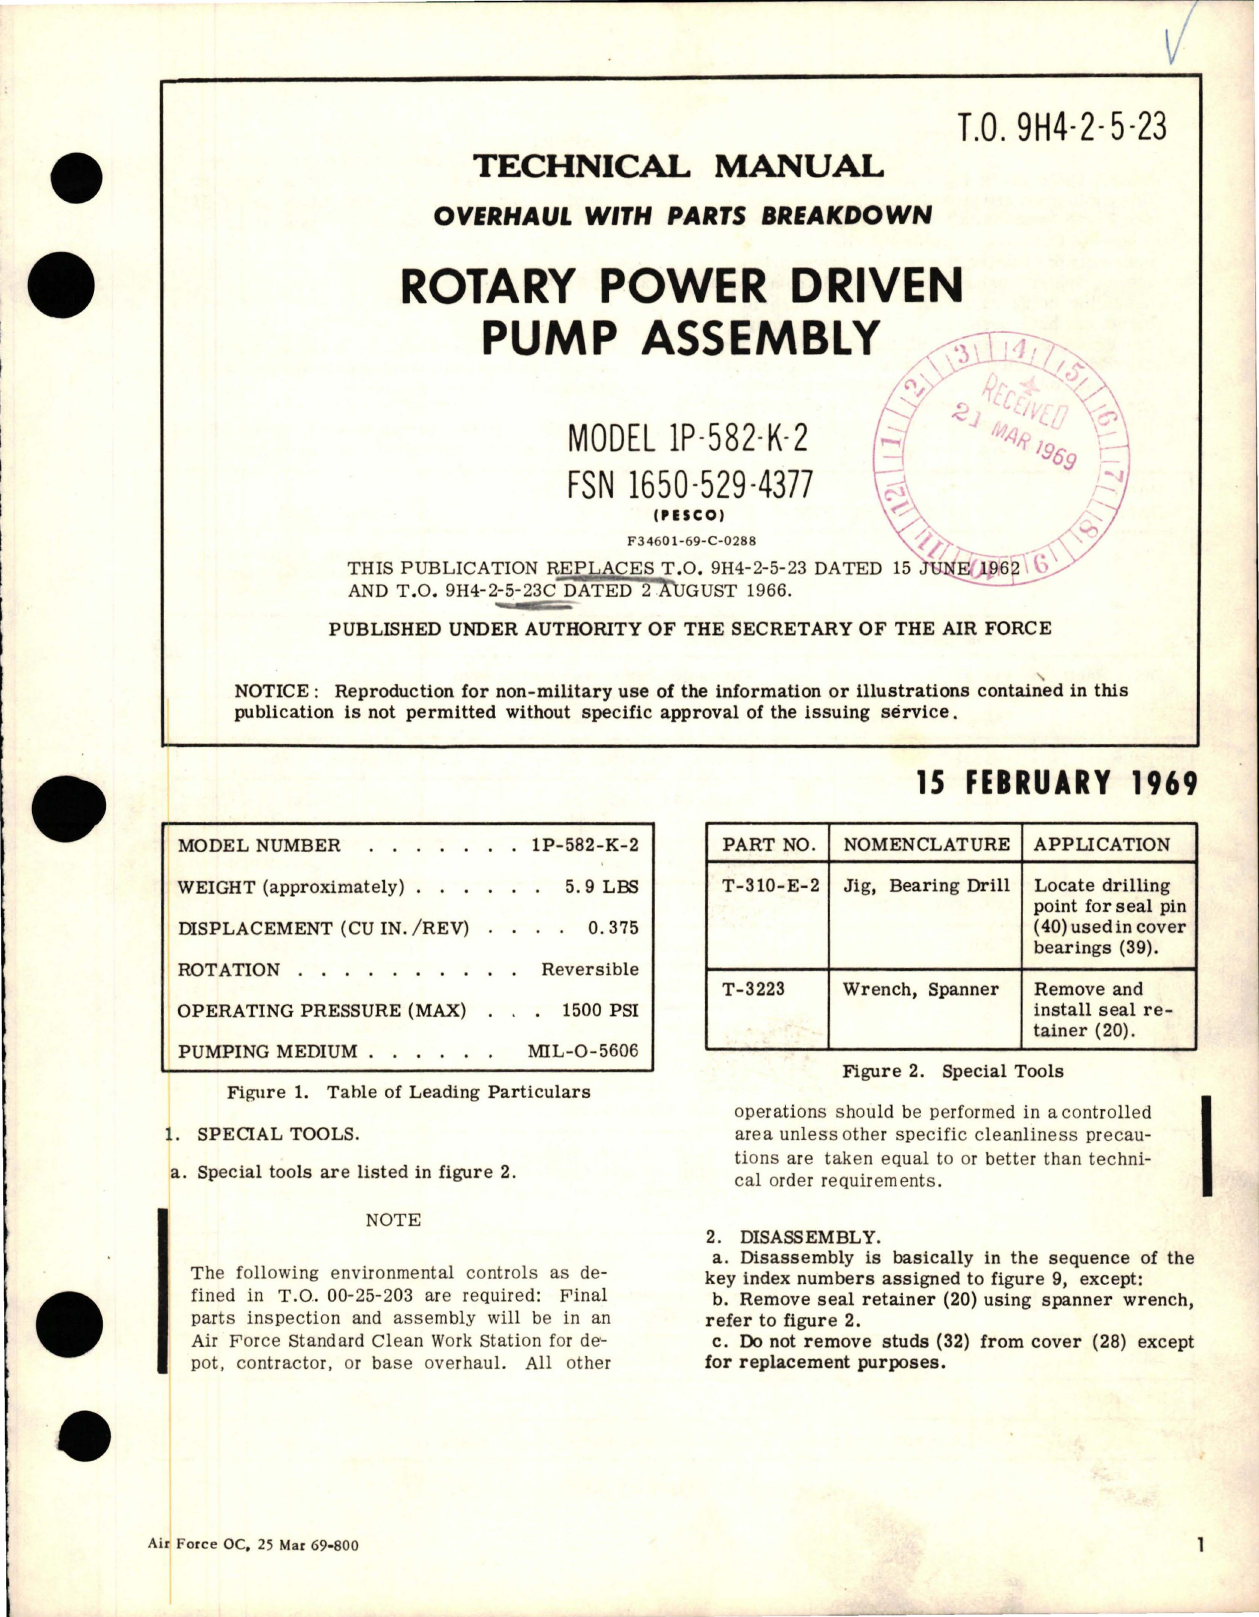 Sample page 1 from AirCorps Library document: Overhaul with Parts Breakdown for Rotary Power Driven Pump Assembly - Model 1P-582-K-2 